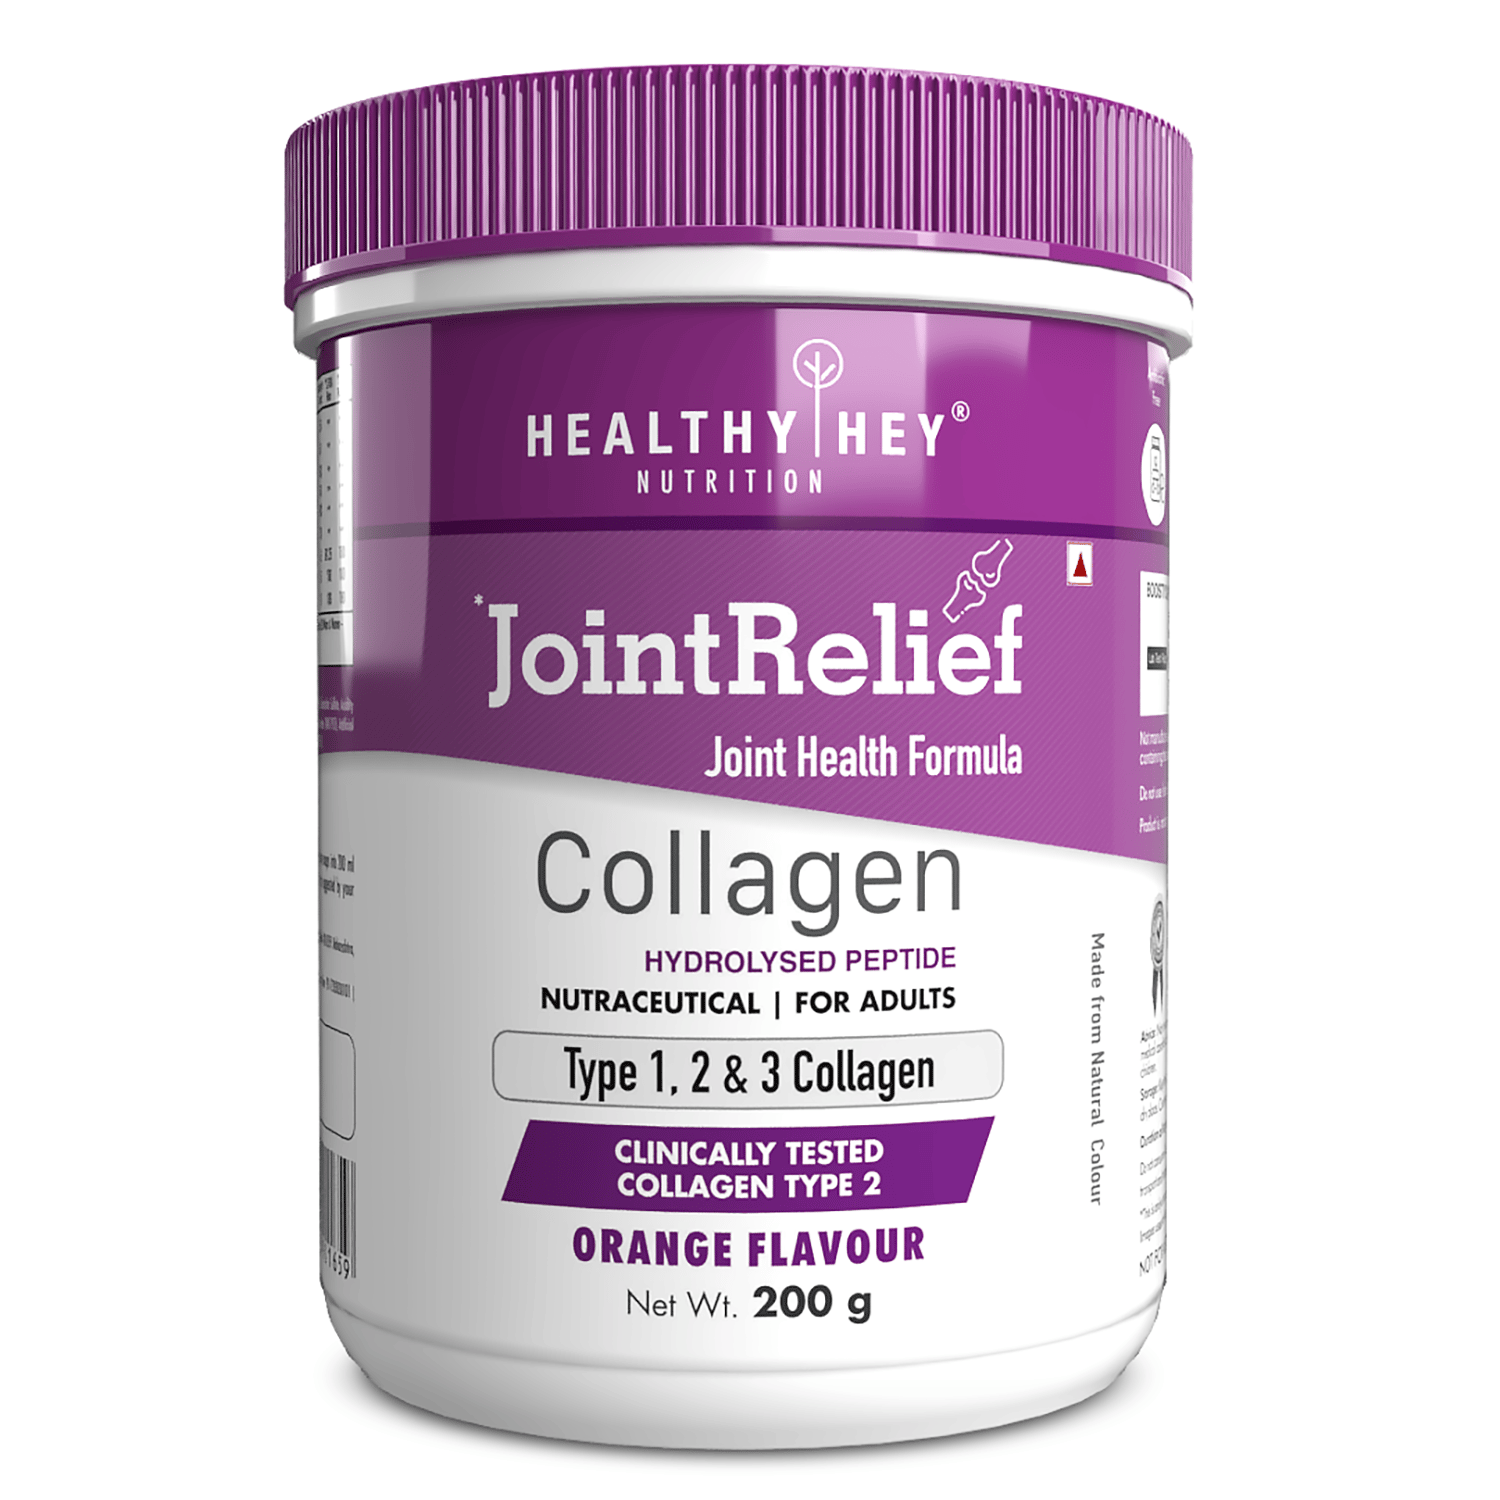 JointRelief Collagen Peptide Type 1, 2 and 3 Hydrolysed with Glucosamine,Chondroitin,MSM 200g,Orange